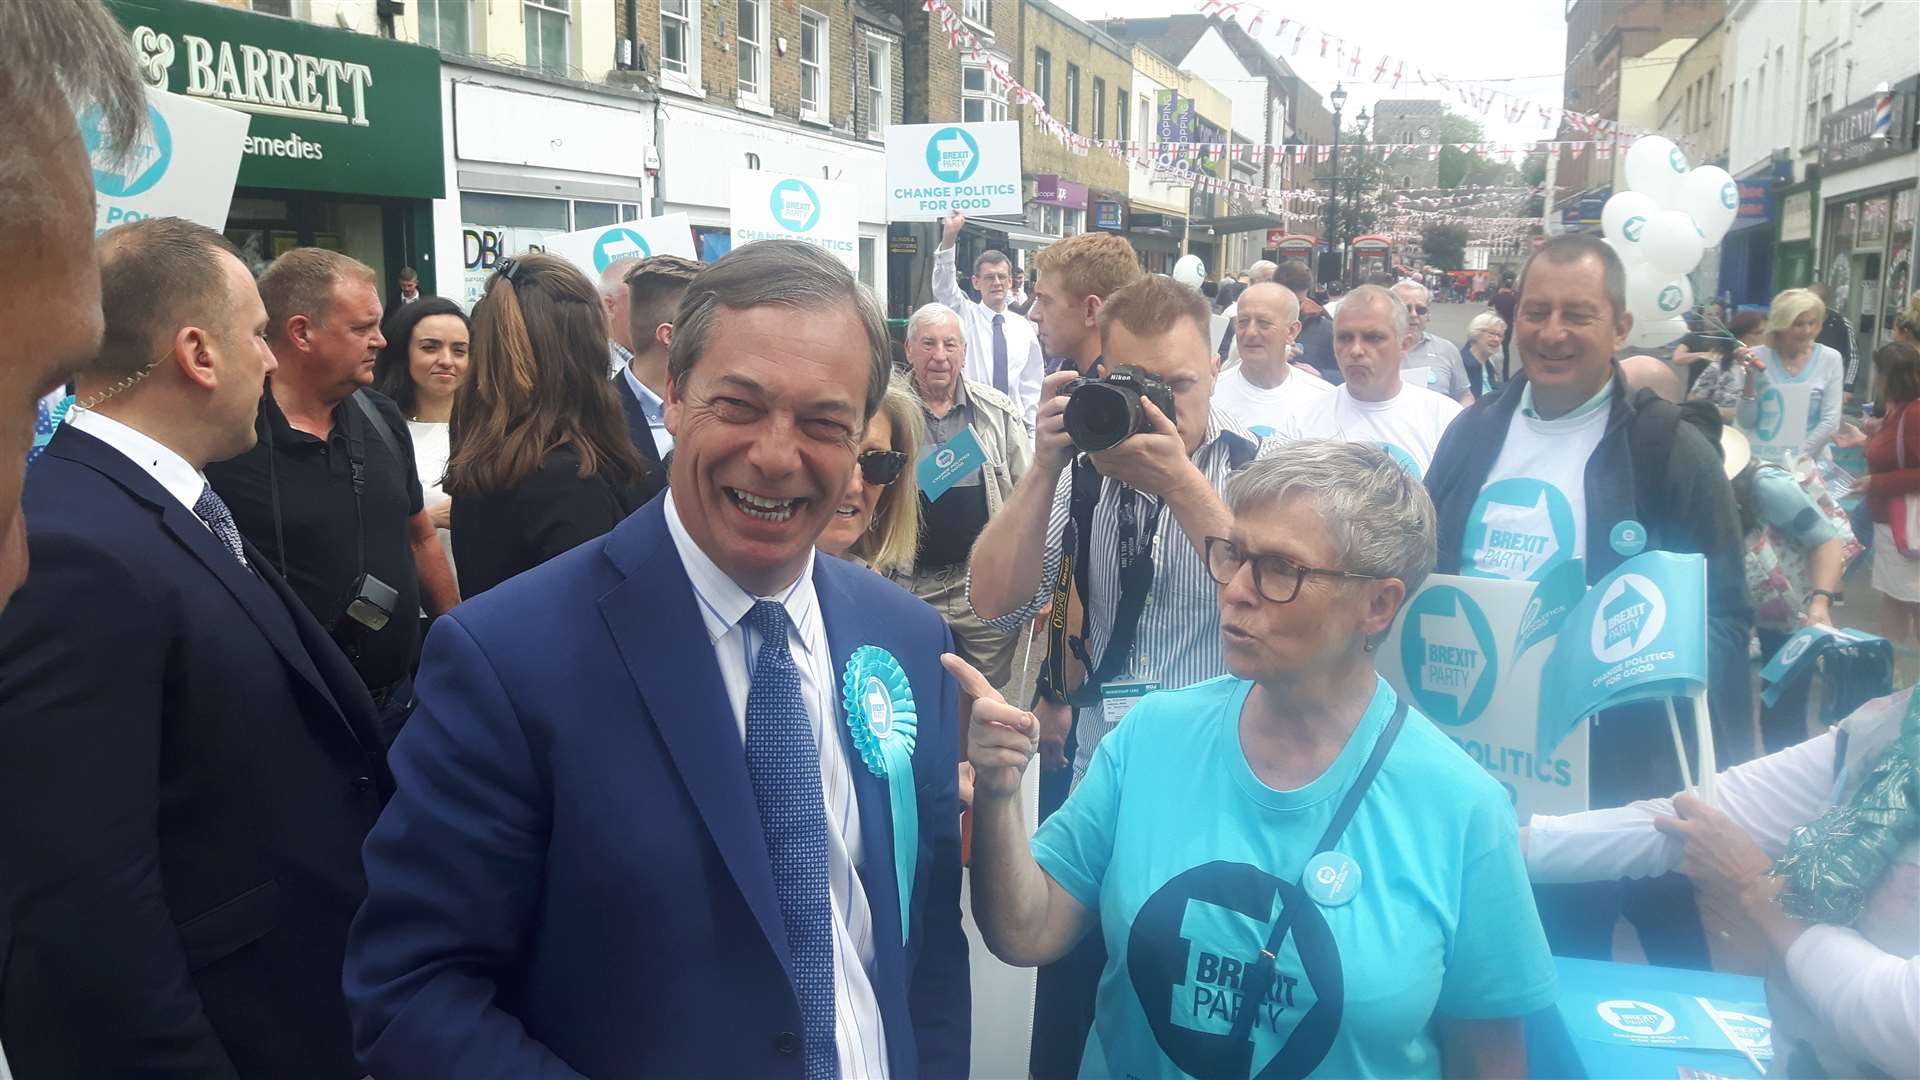 Nigel with supporters in Dartford in May